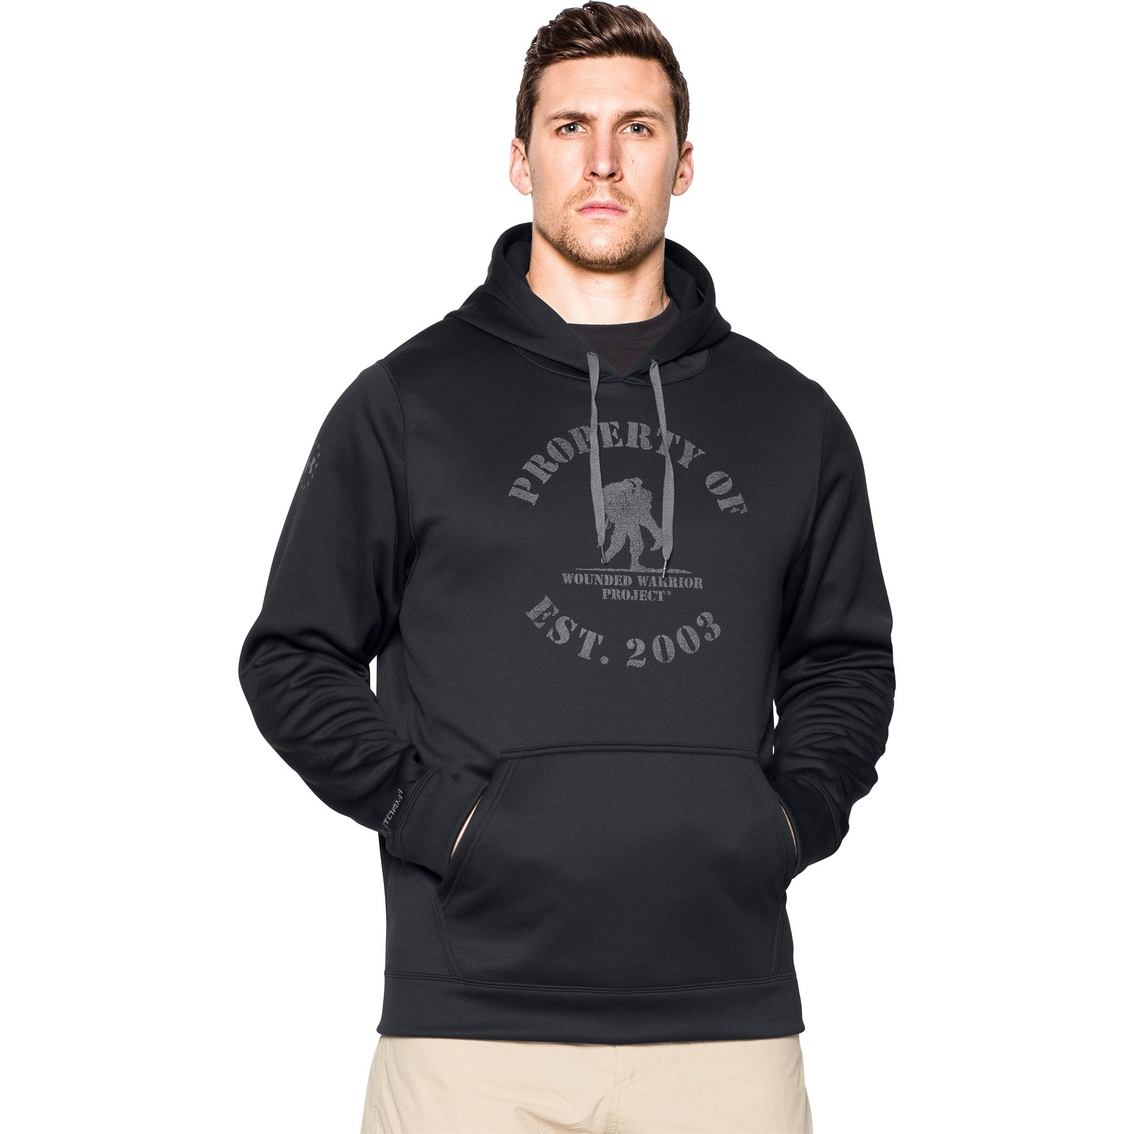 under armour wounded warrior jacket